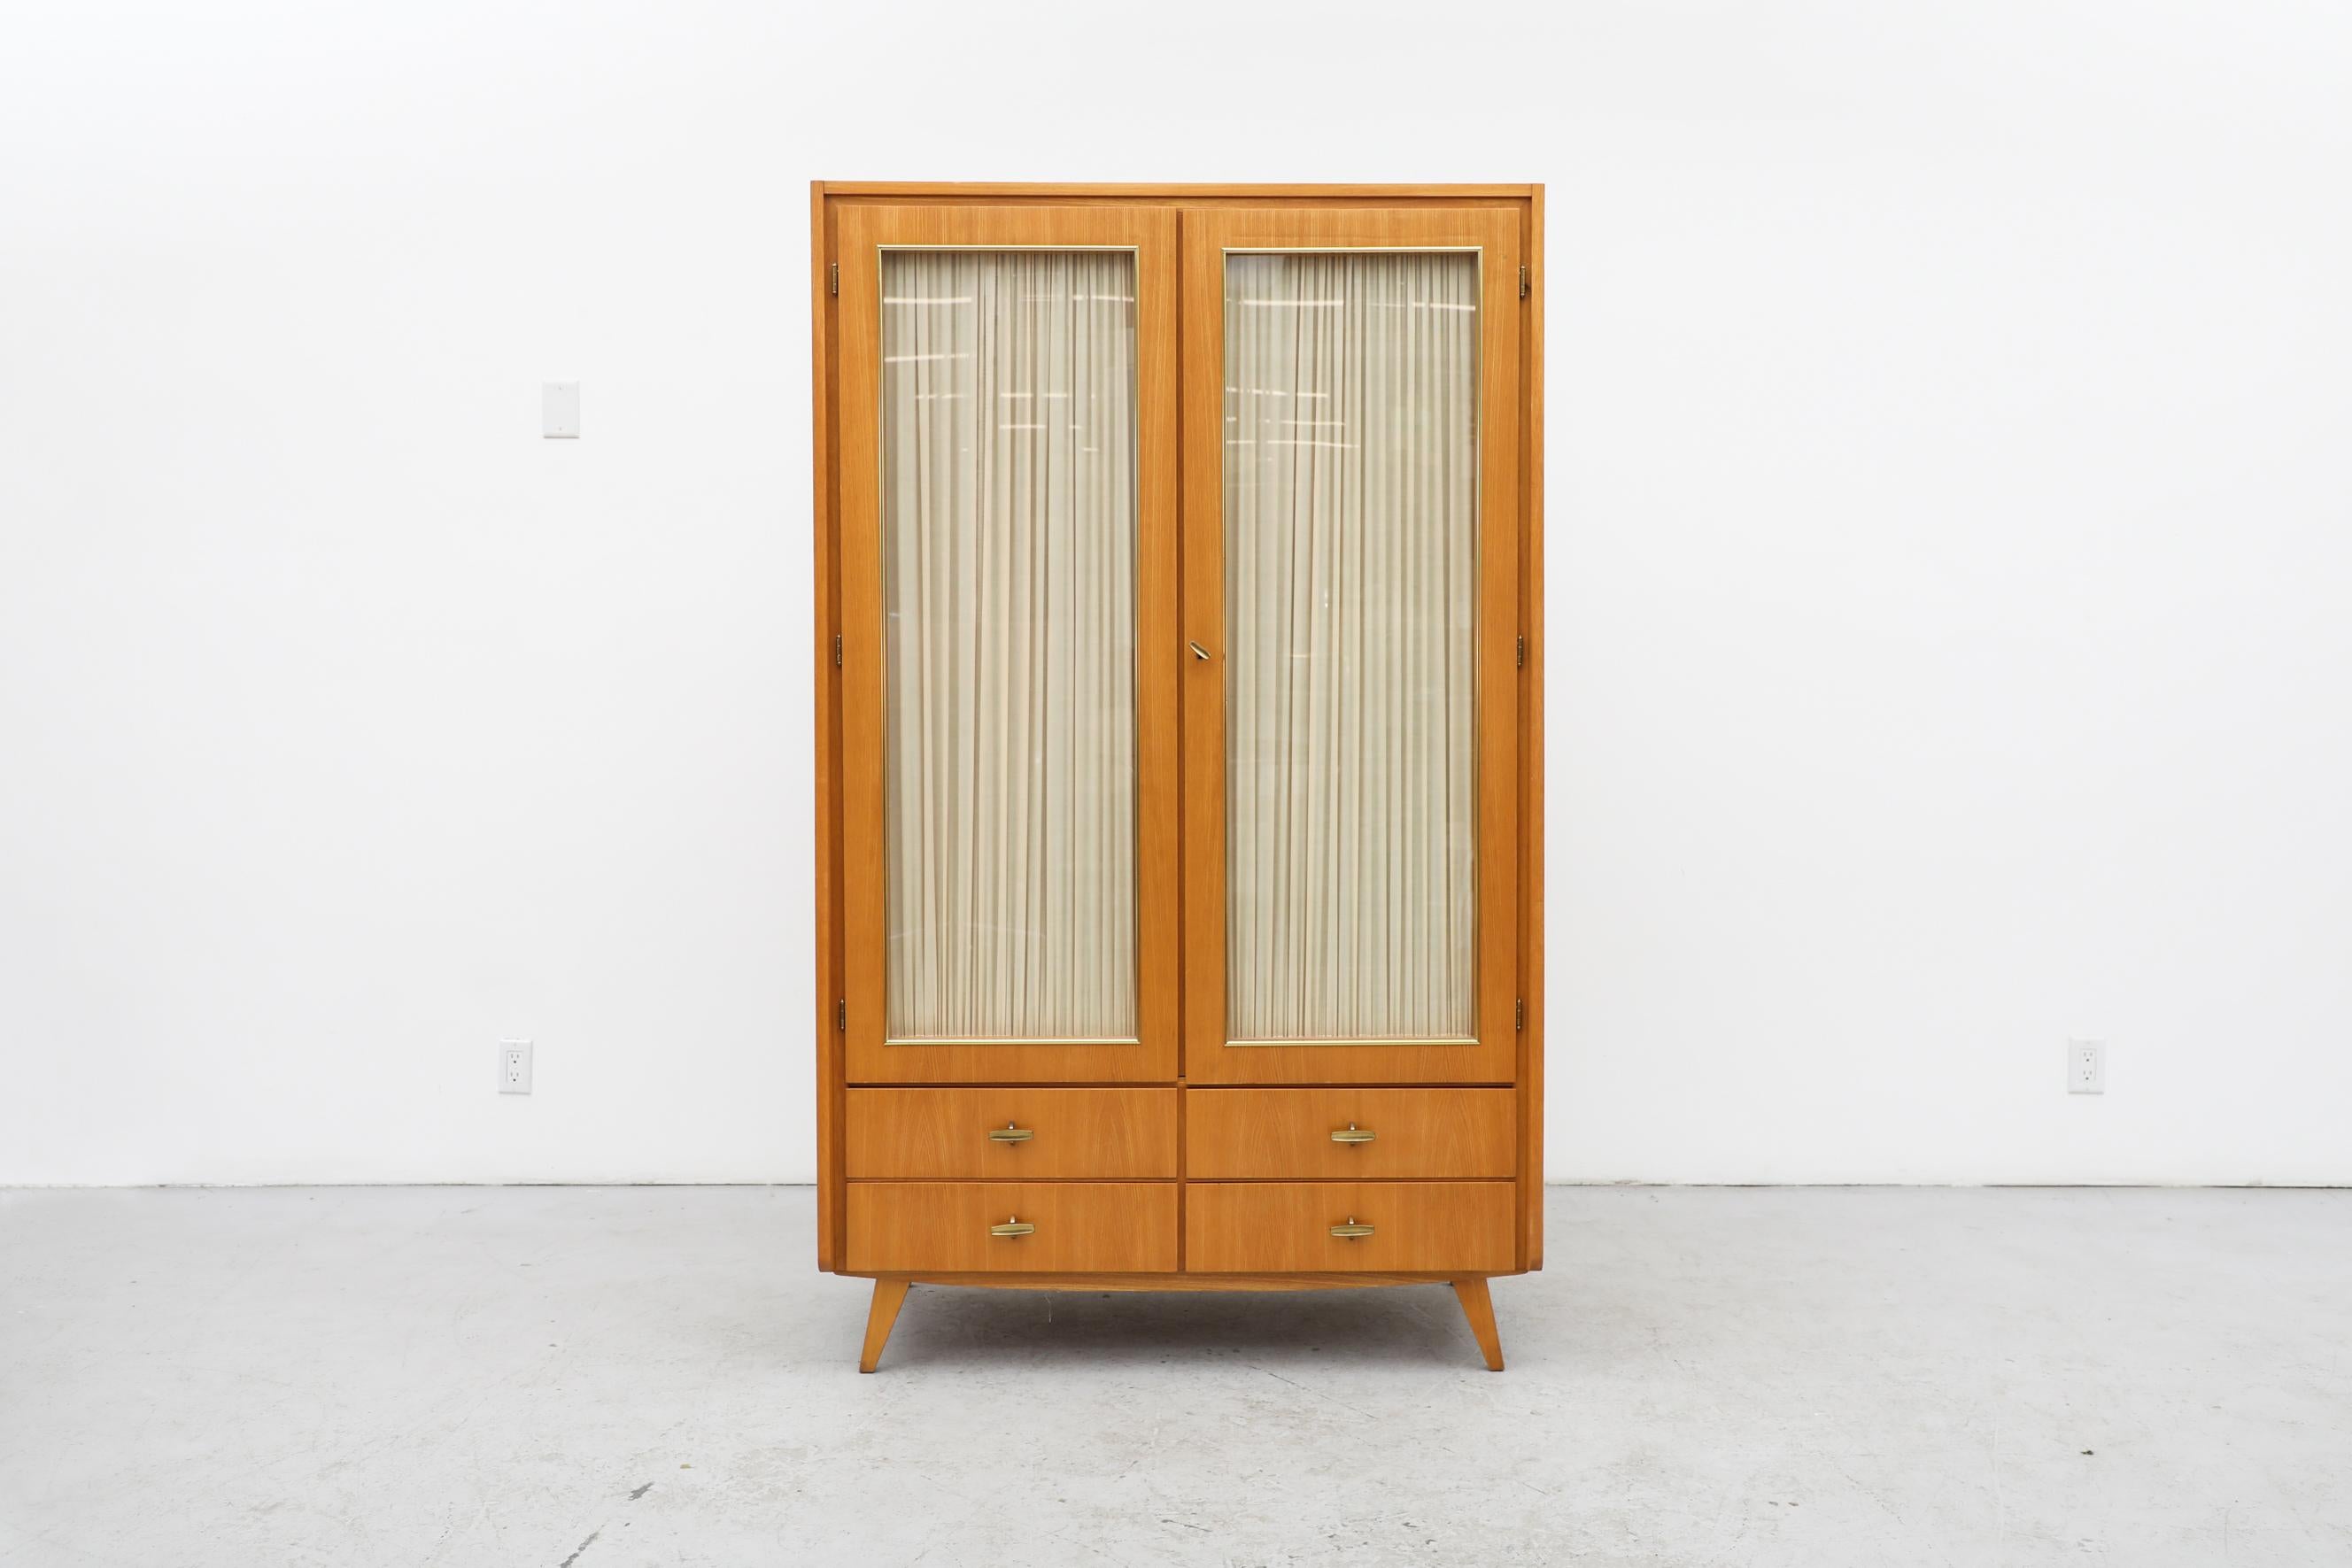 1950's Musterring locking wardrobe with locking glass doors and 4 lower drawers. The wardrobe has cream curtains on the inside of the glass doors and a brass toned clothing rod. Blonde exterior with mahogany interior. This piece is in good original